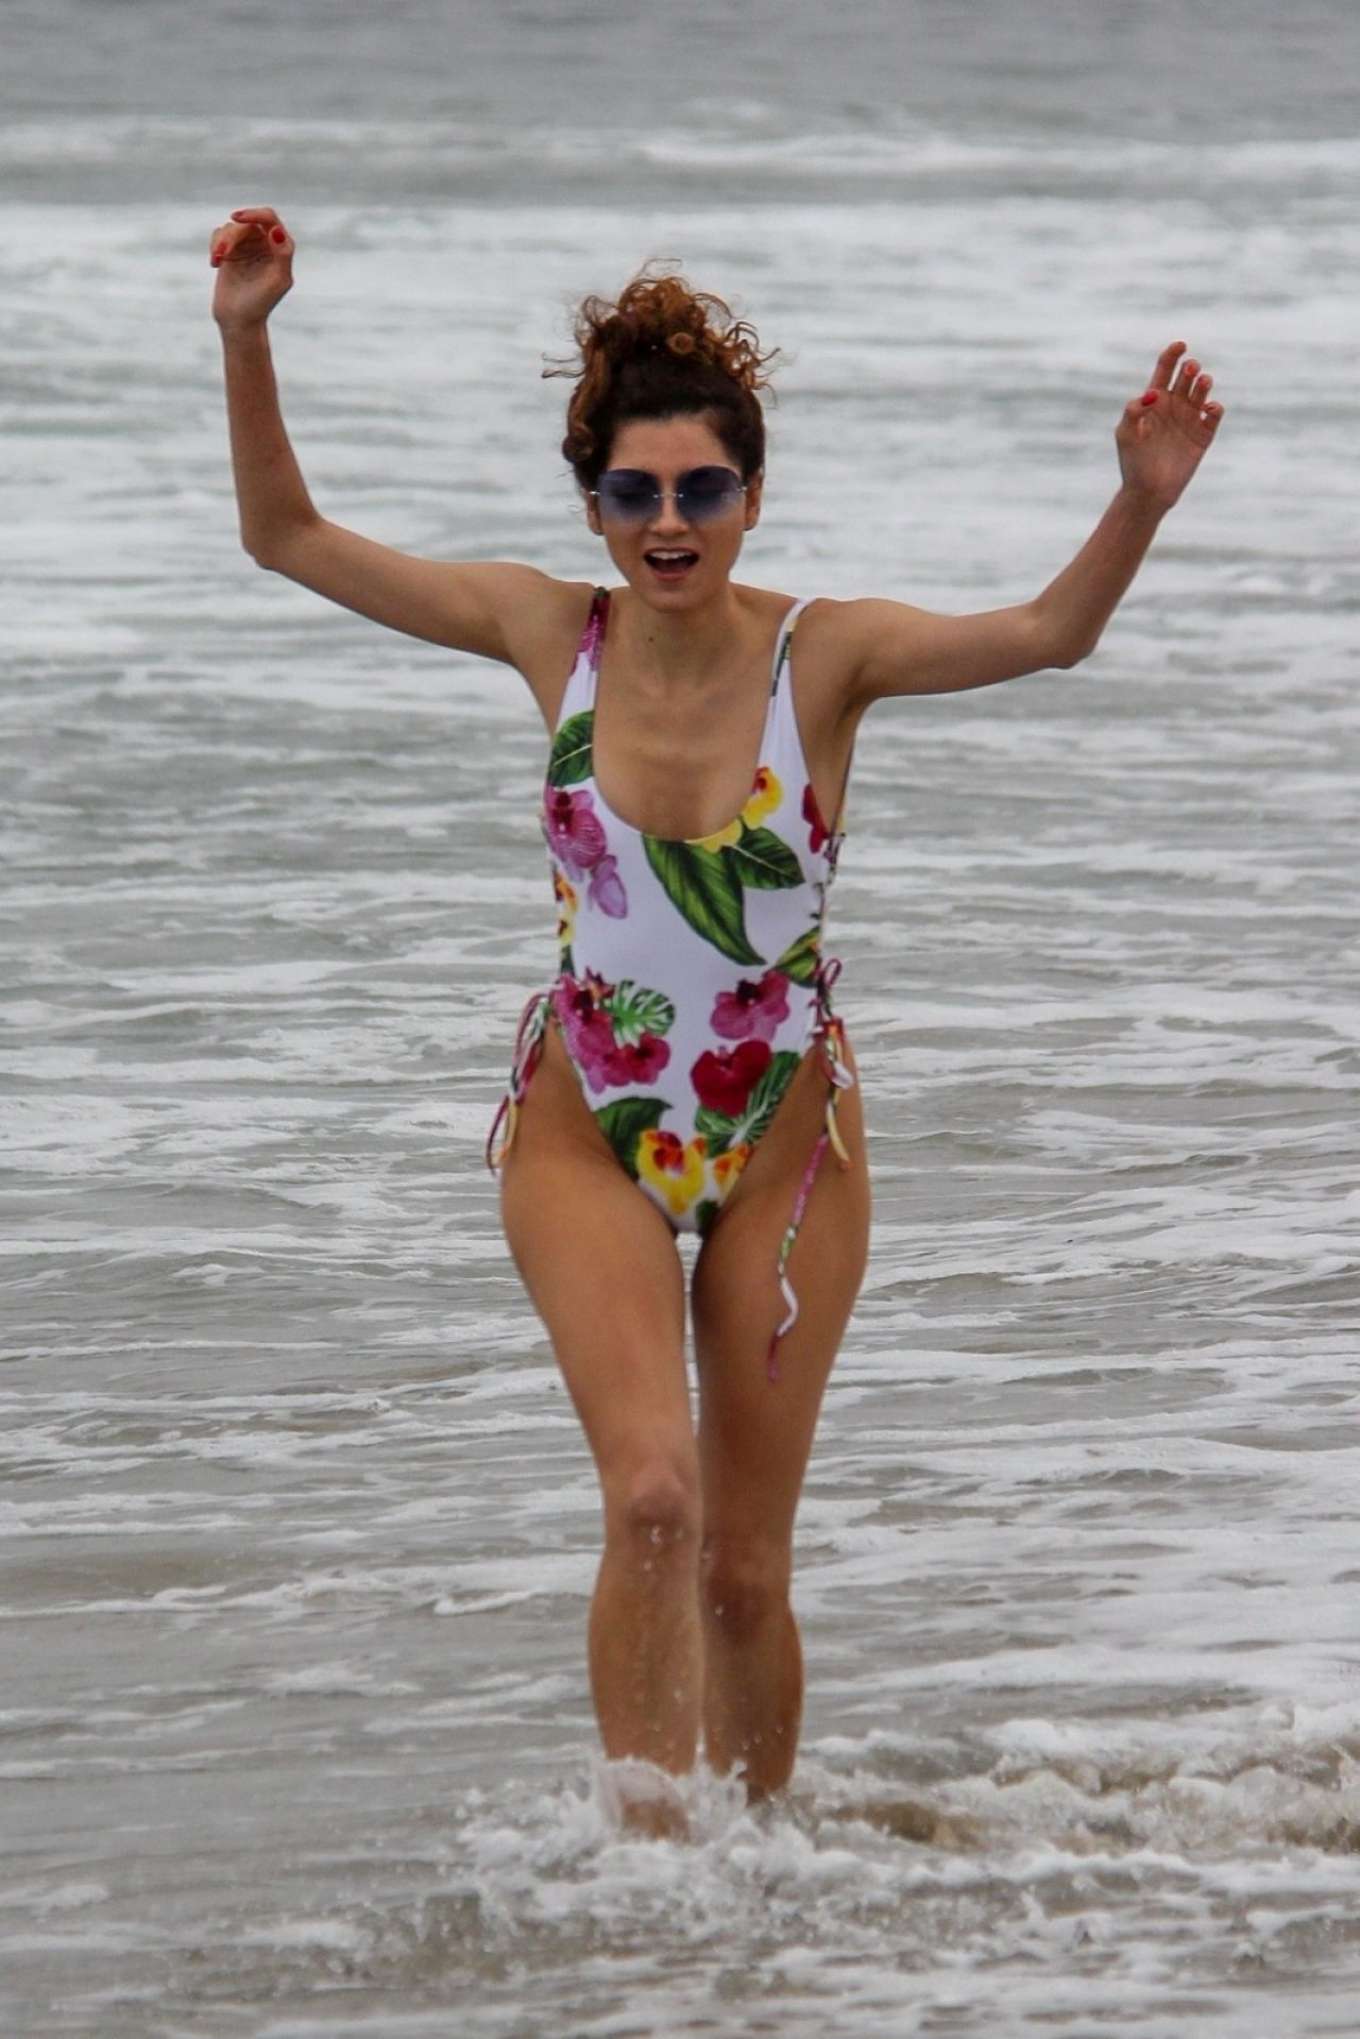 Blanca Blanco in Floral Swimsuit on the Beach in Malibu